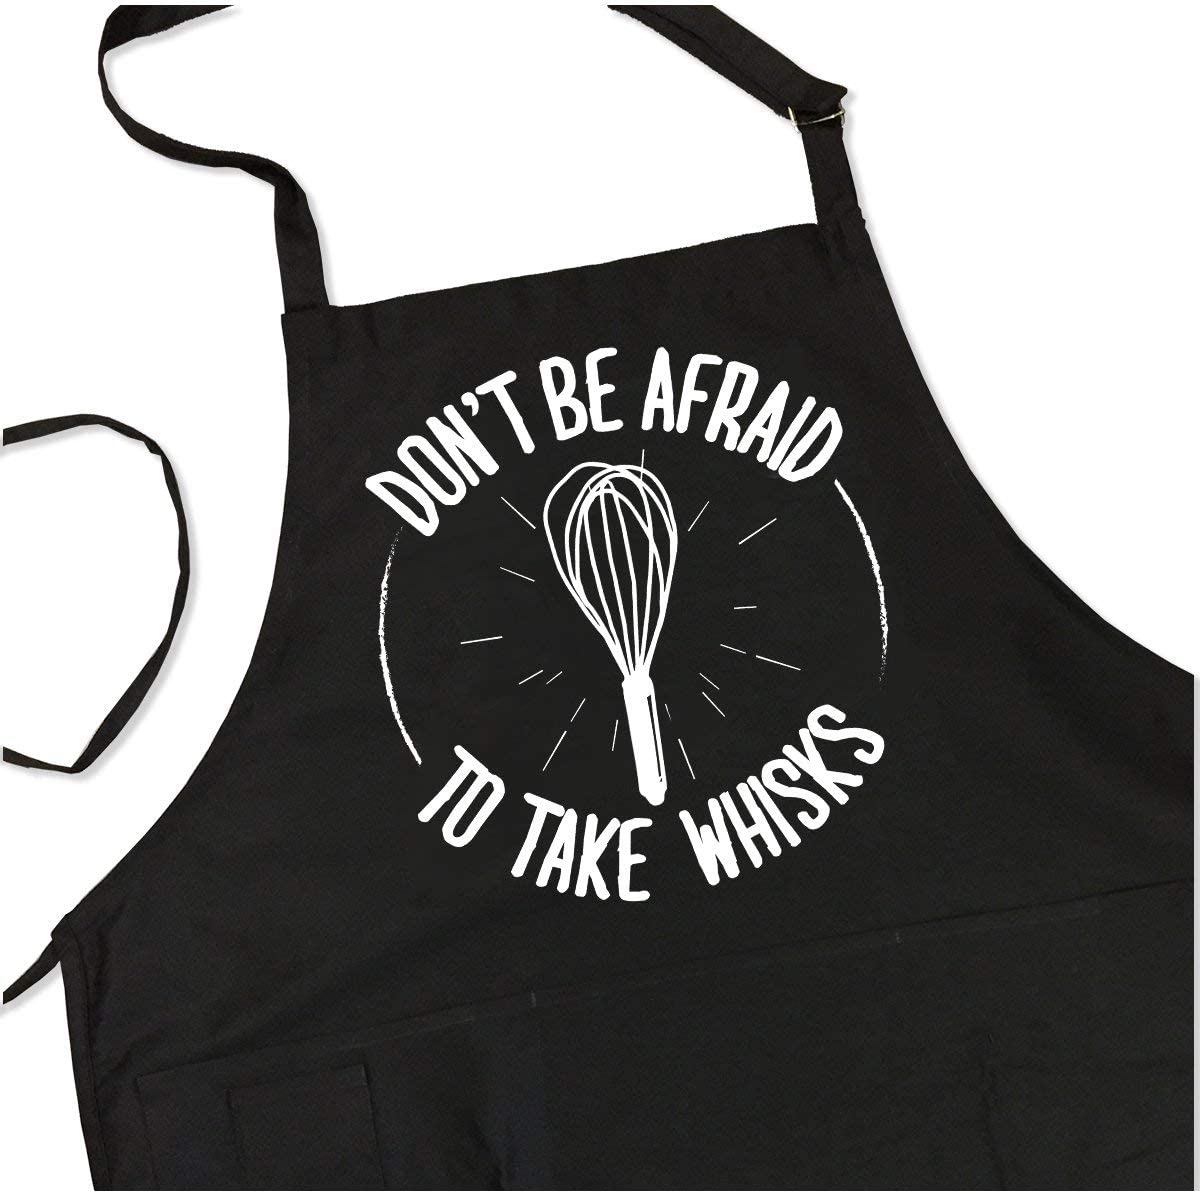 ApronMen - Don't Be Afraid To Take Whisks Apron - BBQ Grill Apron - 1 Size Fits All Chef Apron Poly/Cotton 4 Utility Pockets, Adjustable Neck and Extra Long Waist Ties